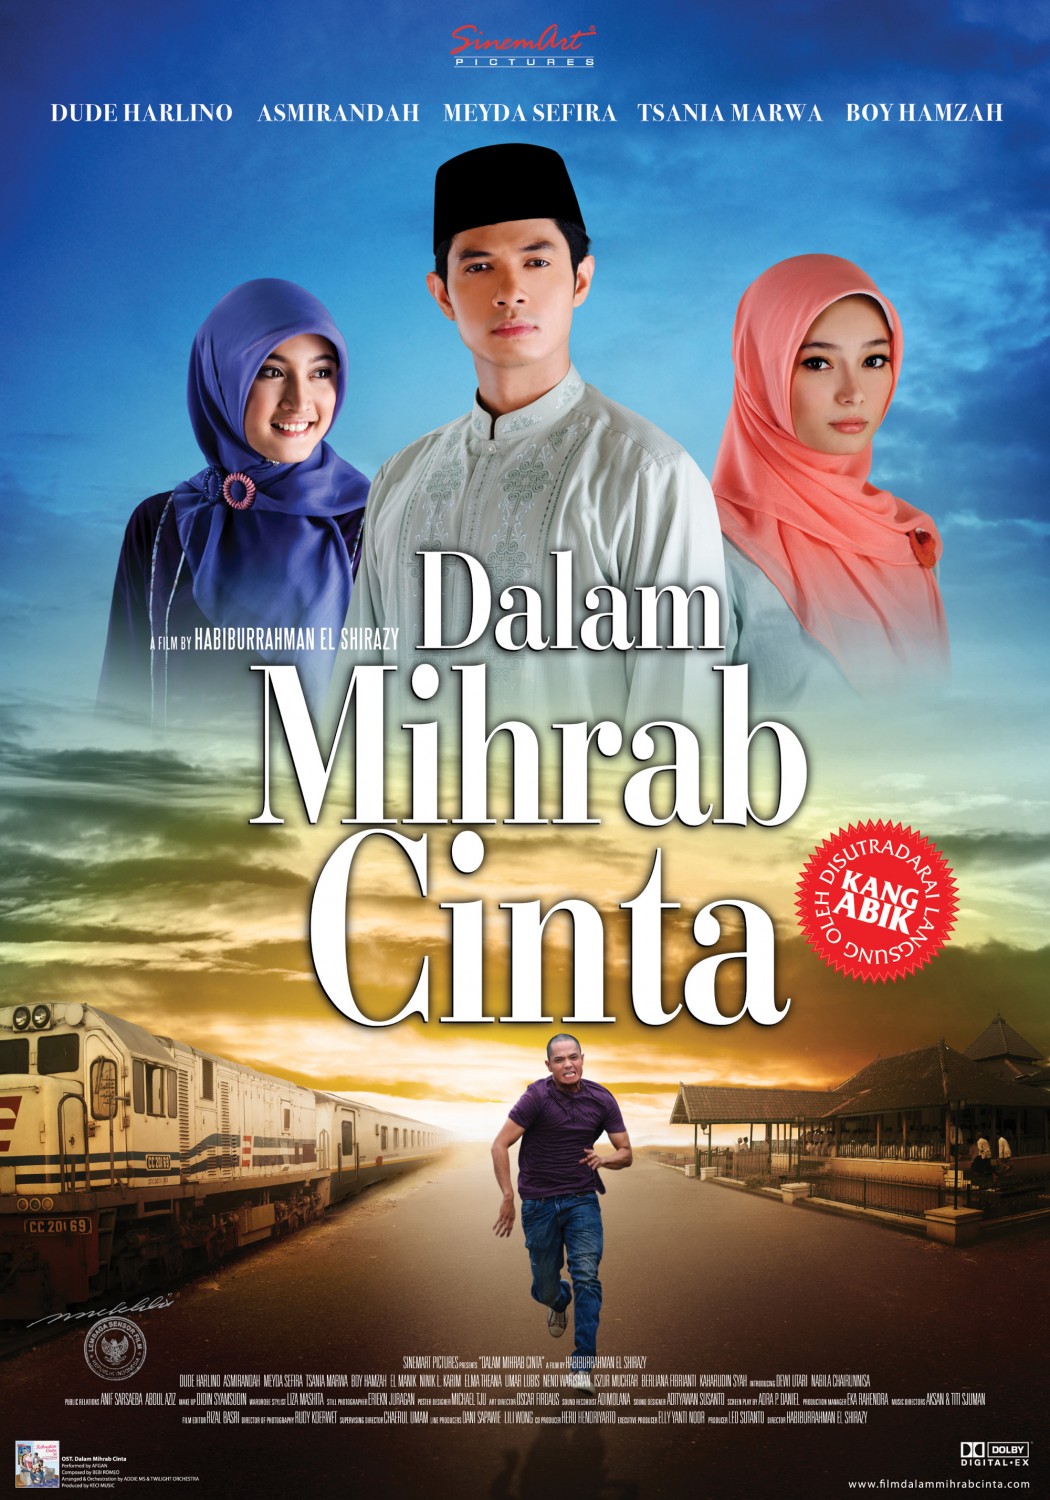 Extra Large Movie Poster Image for Dalam mihrab cinta (#2 of 2)